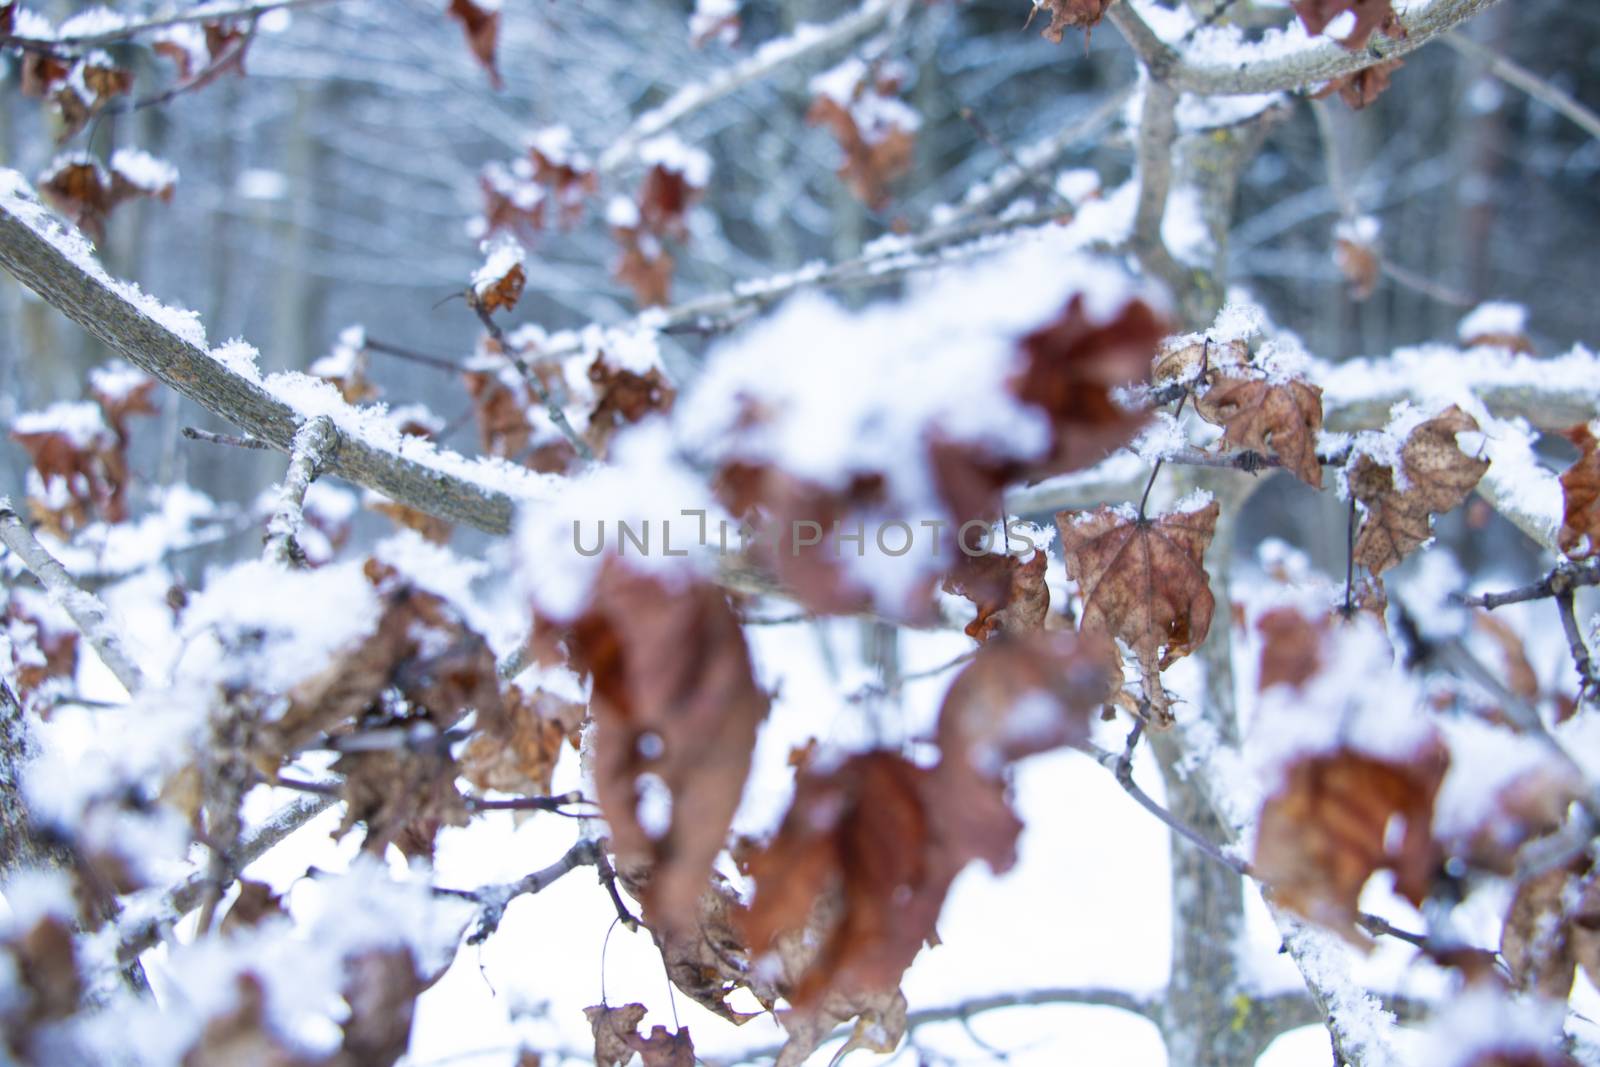 Beech tree leaf covered with snow. Fresh snow on withered leaves. Season winter